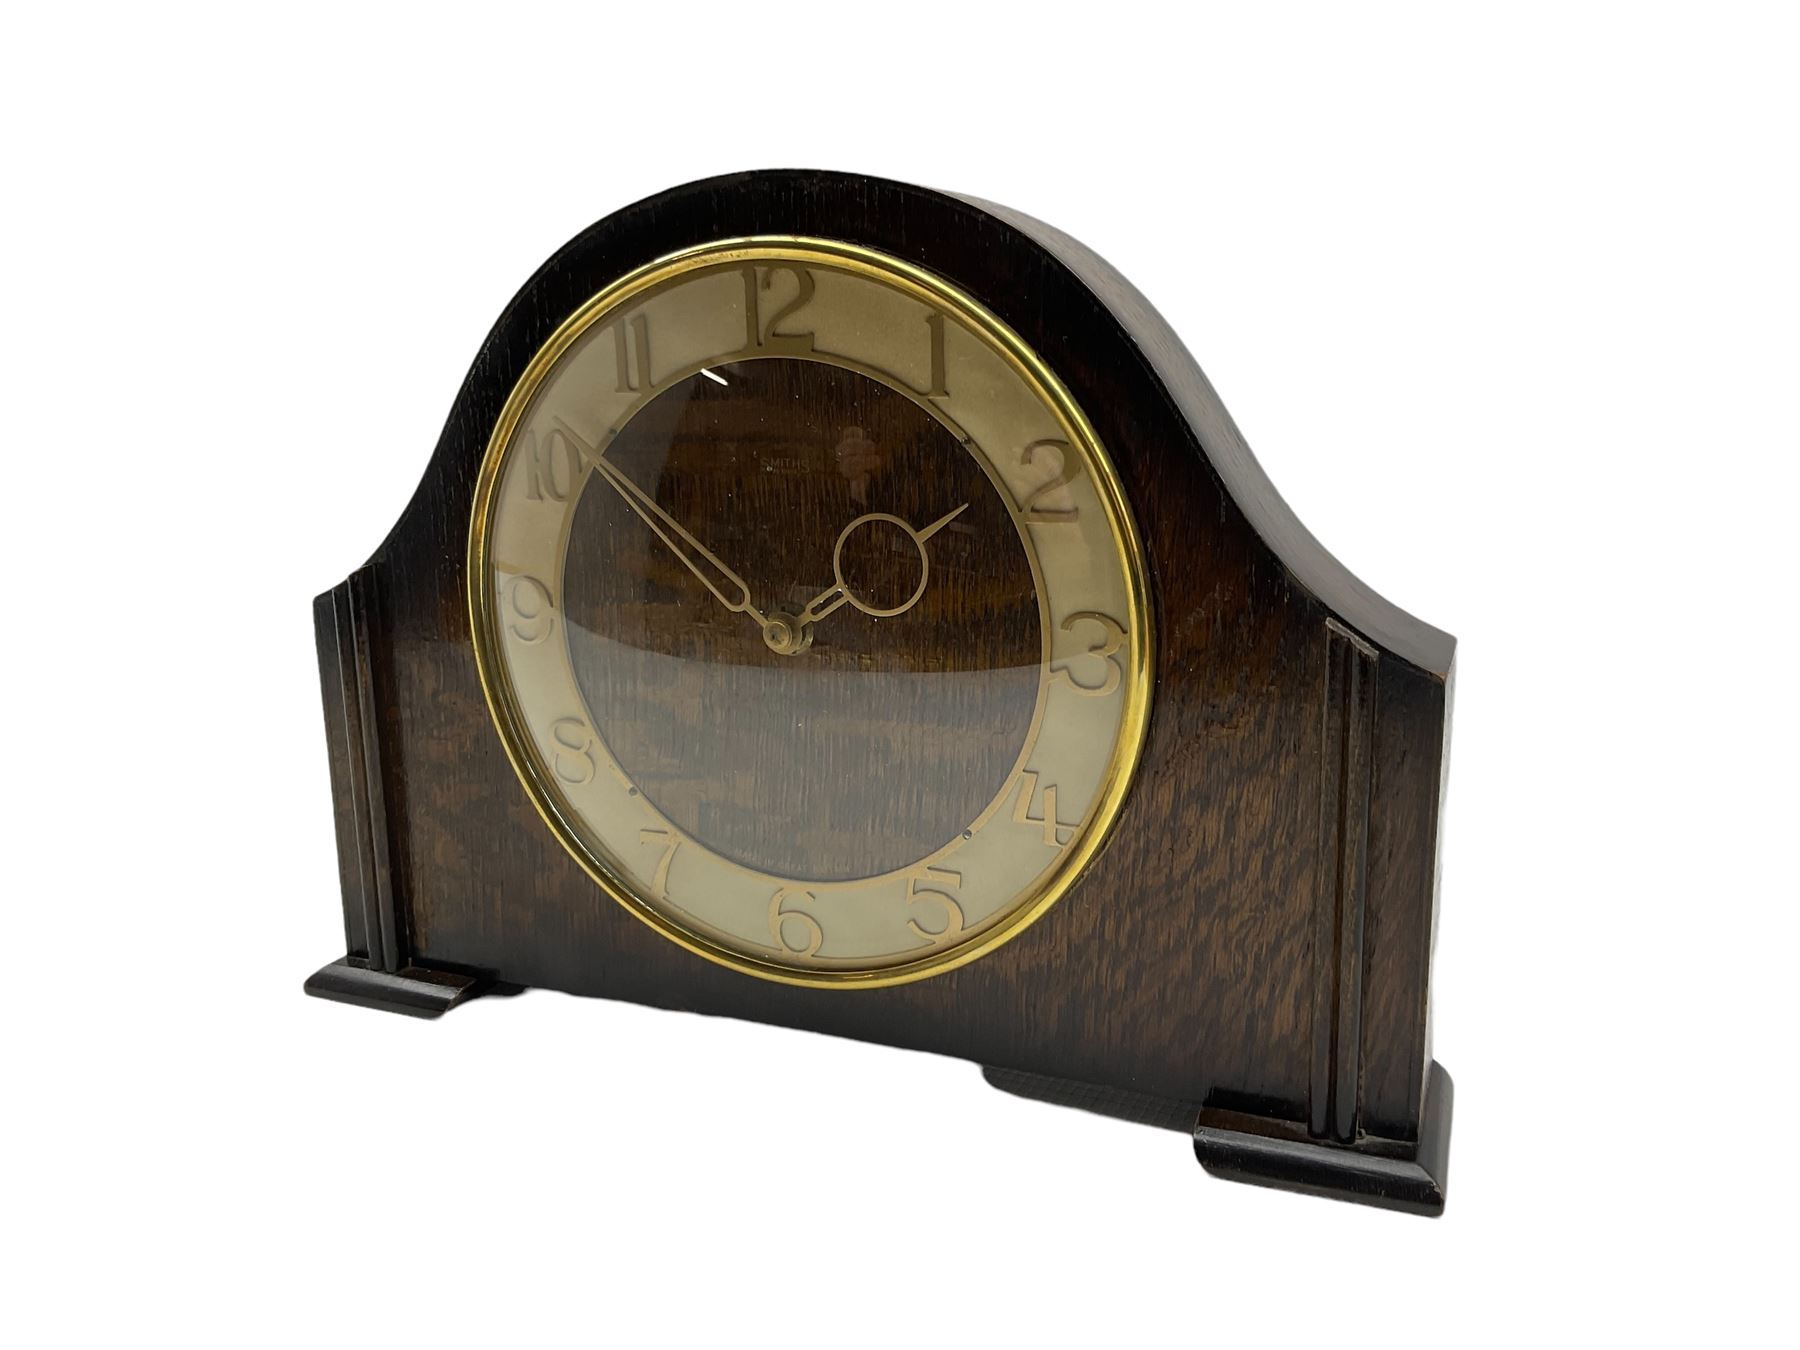 Smiths oak cased 1960's mantle clock with gilt Arabic numerals and baton hands - Image 2 of 3